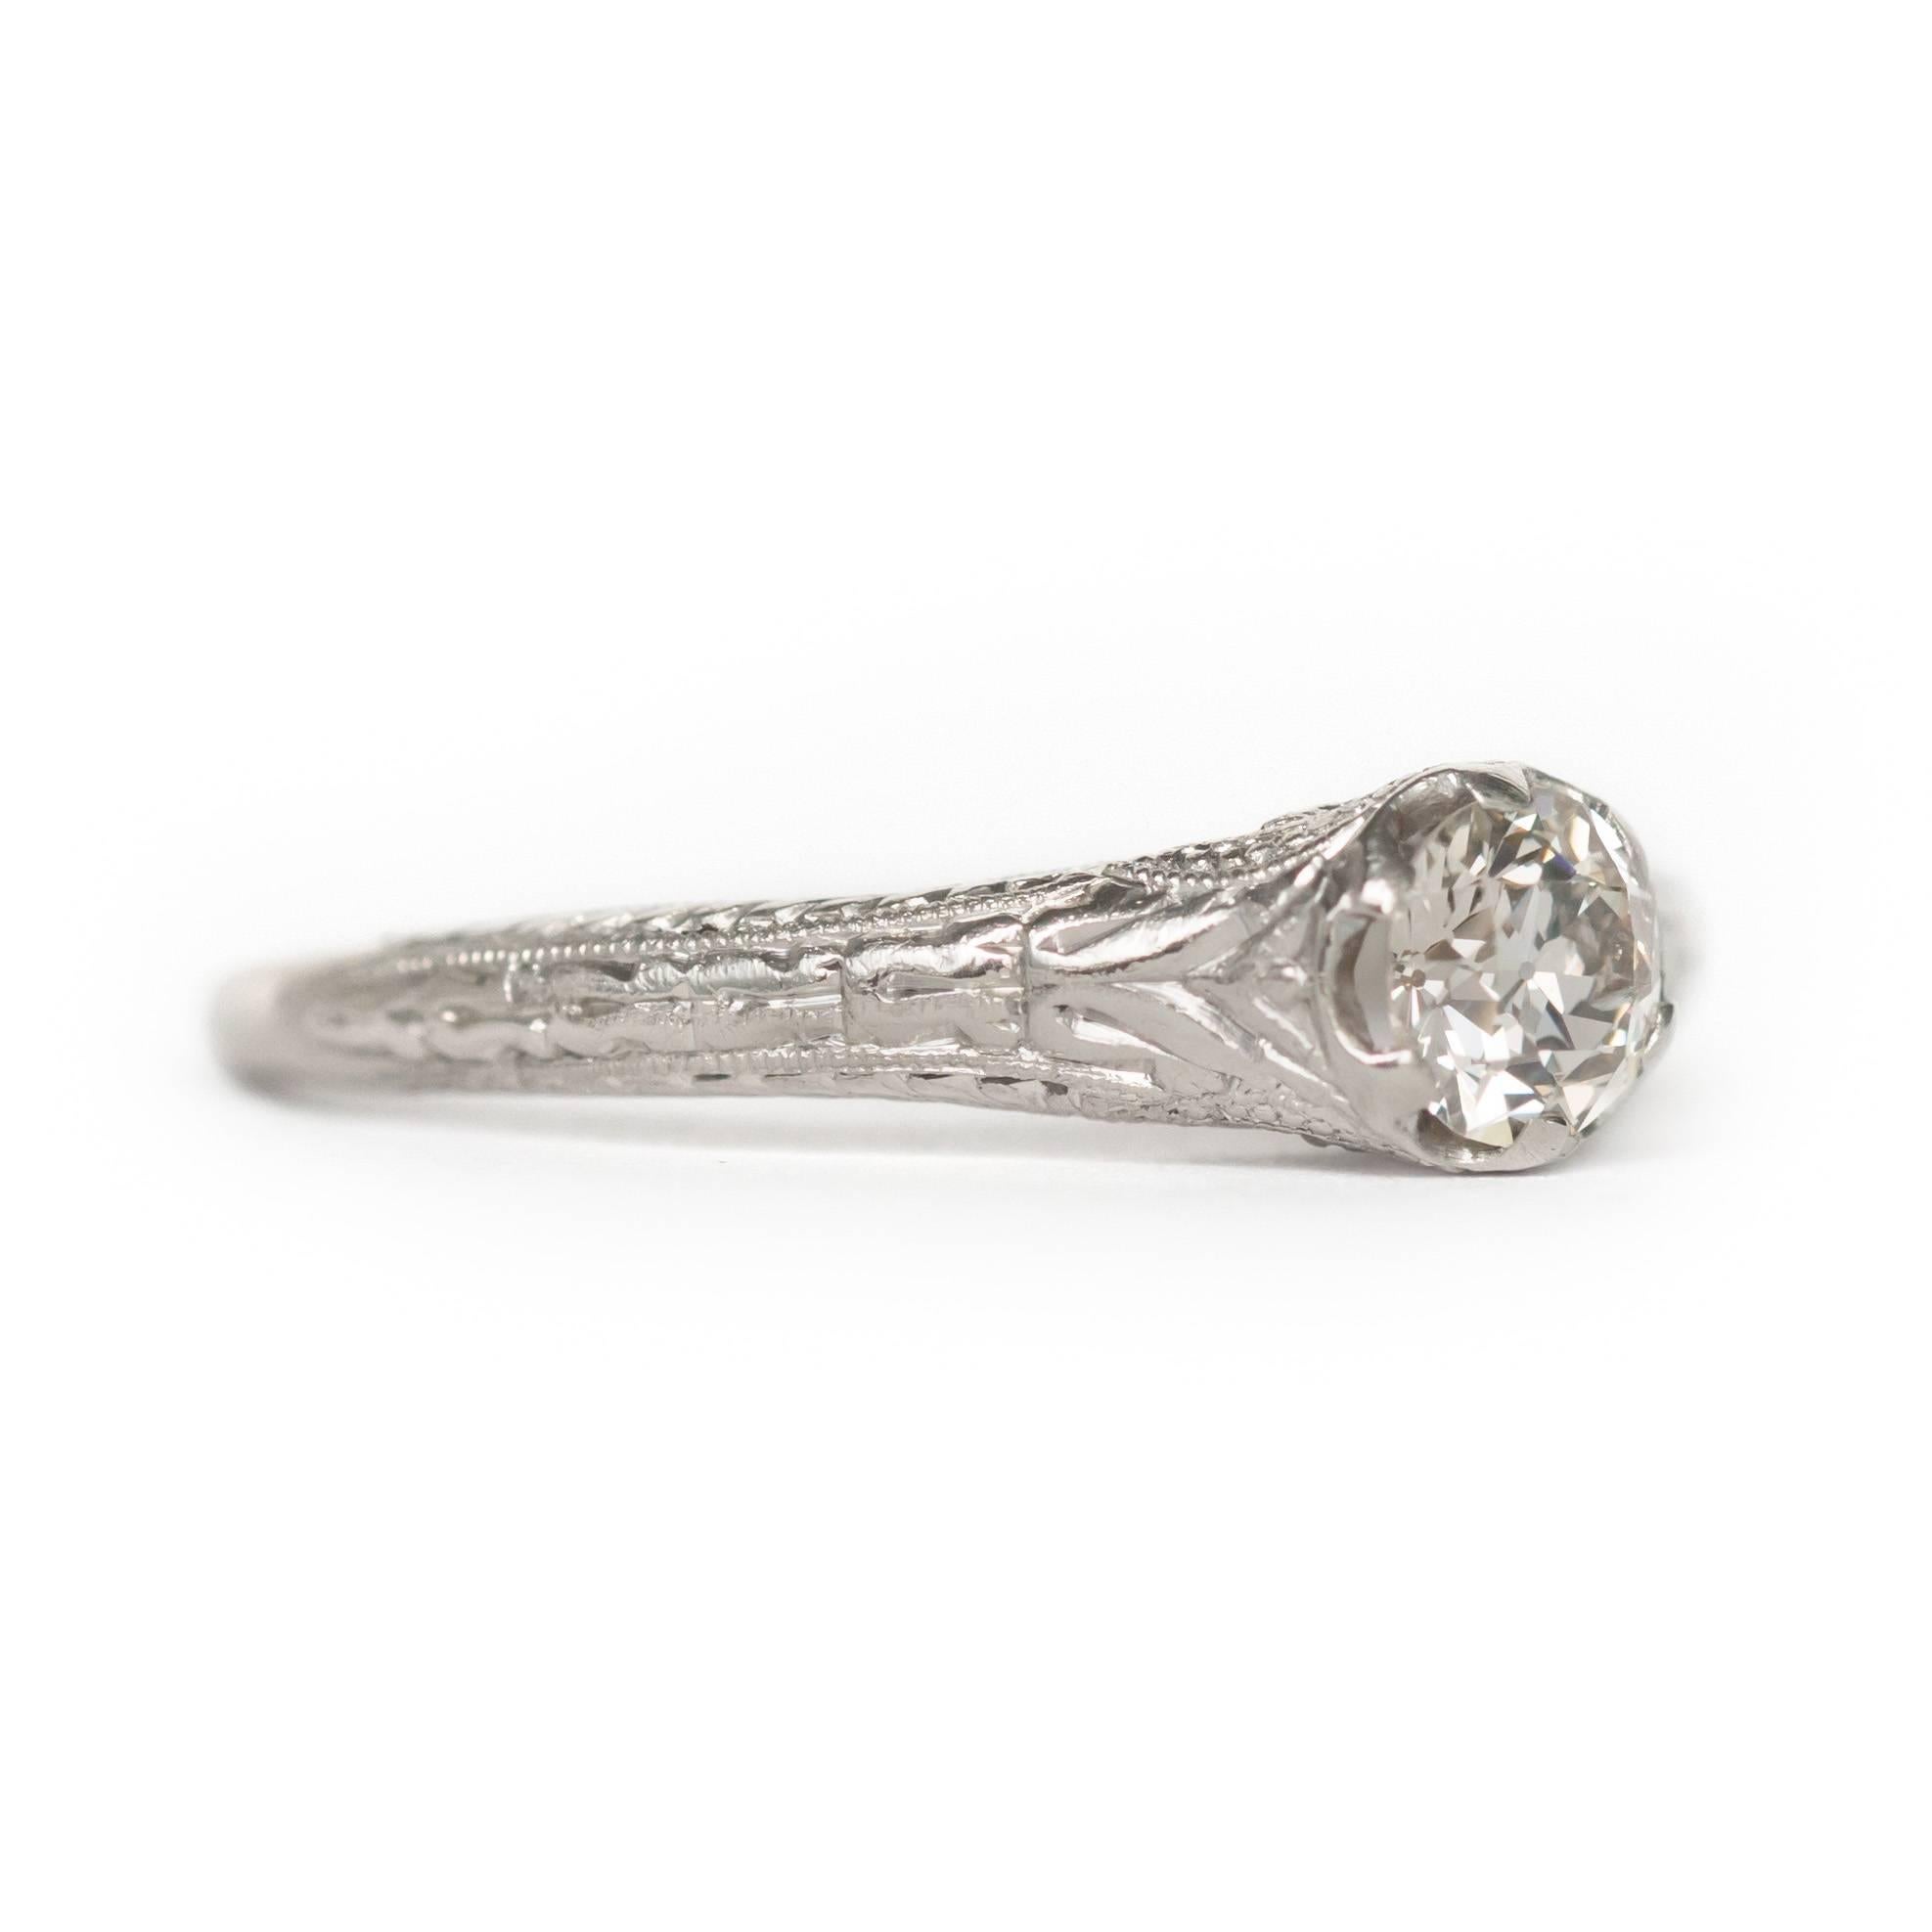 Item Details: 
Ring Size: Approximately 5.30
Metal Type: Platinum
Weight: 2.5 grams

Center Diamond Details:
Shape: Old European Brilliant
Carat Weight: .40 carat
Color: H
Clarity: VS

Finger to Top of Stone Measurement: 5.03mm

Engraving inside